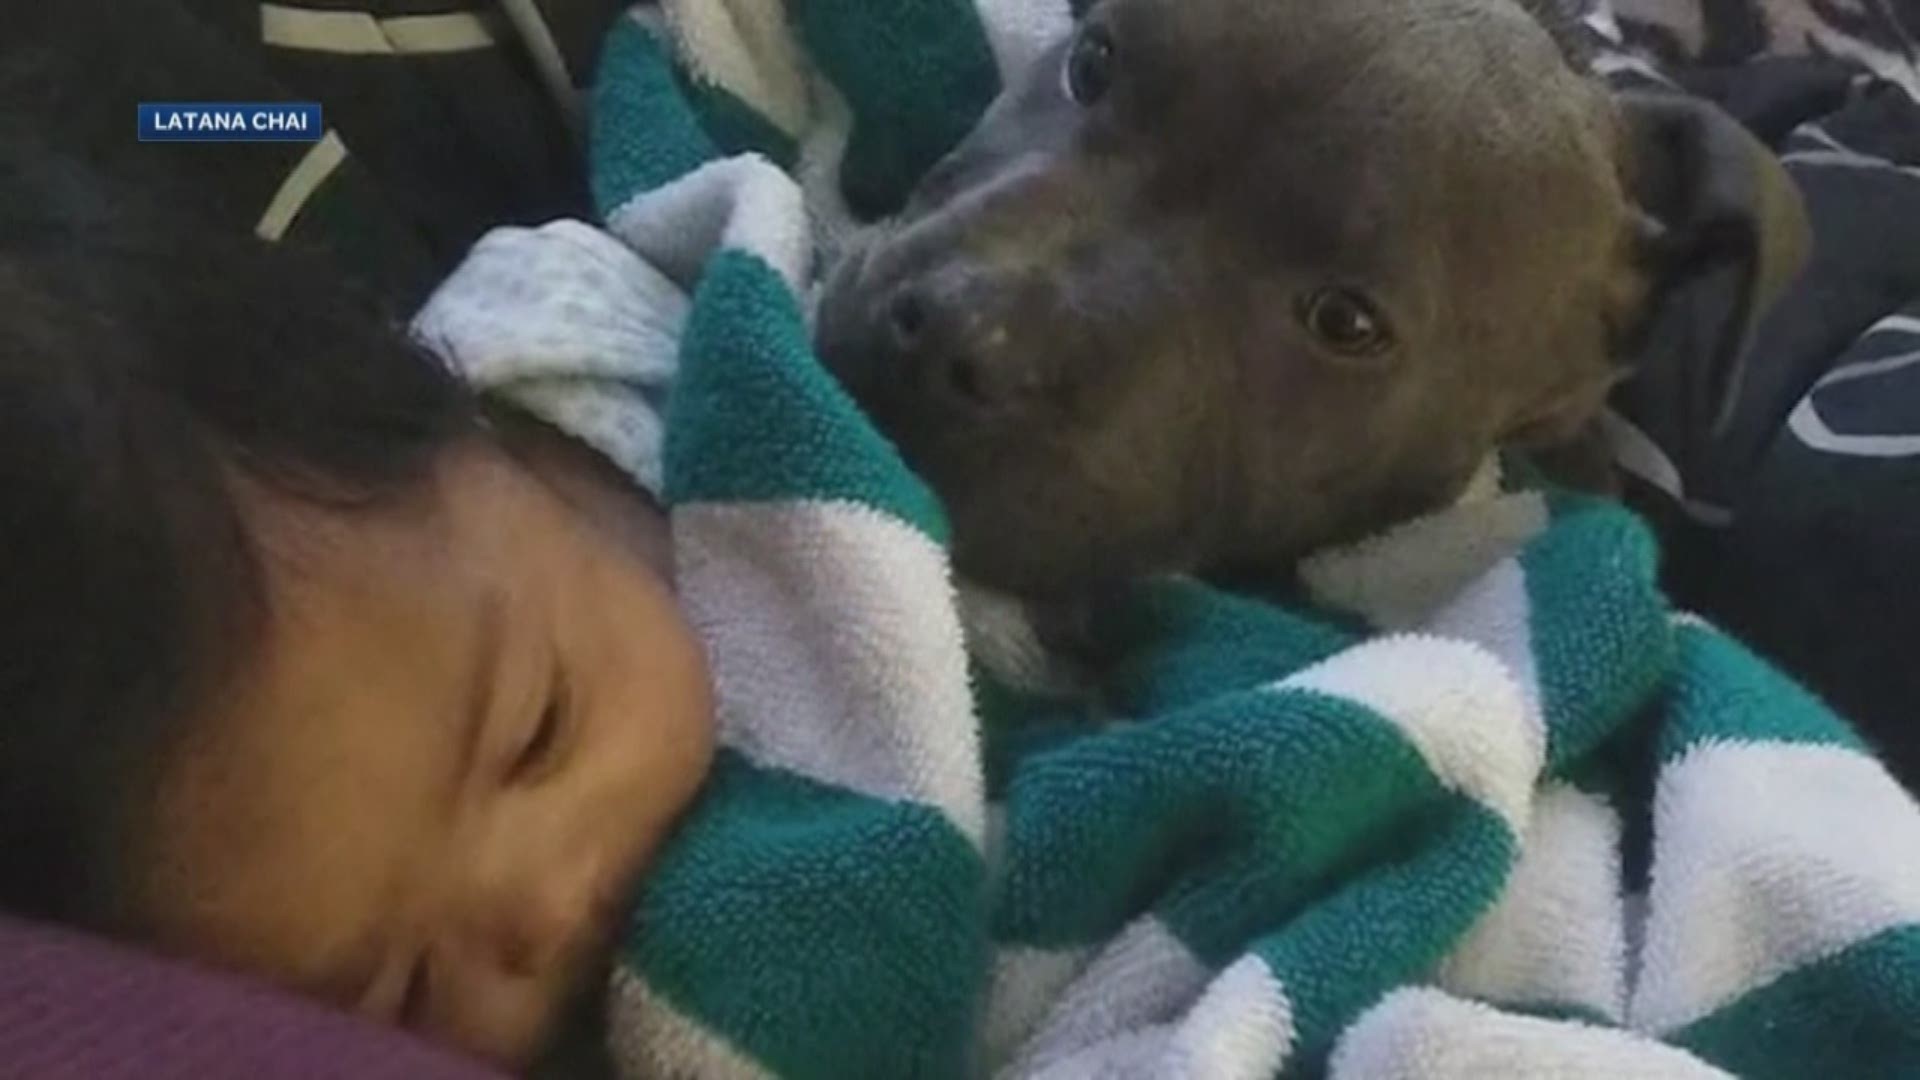 A California woman credits her family's pit bull for saving their lives from a raging house fire.